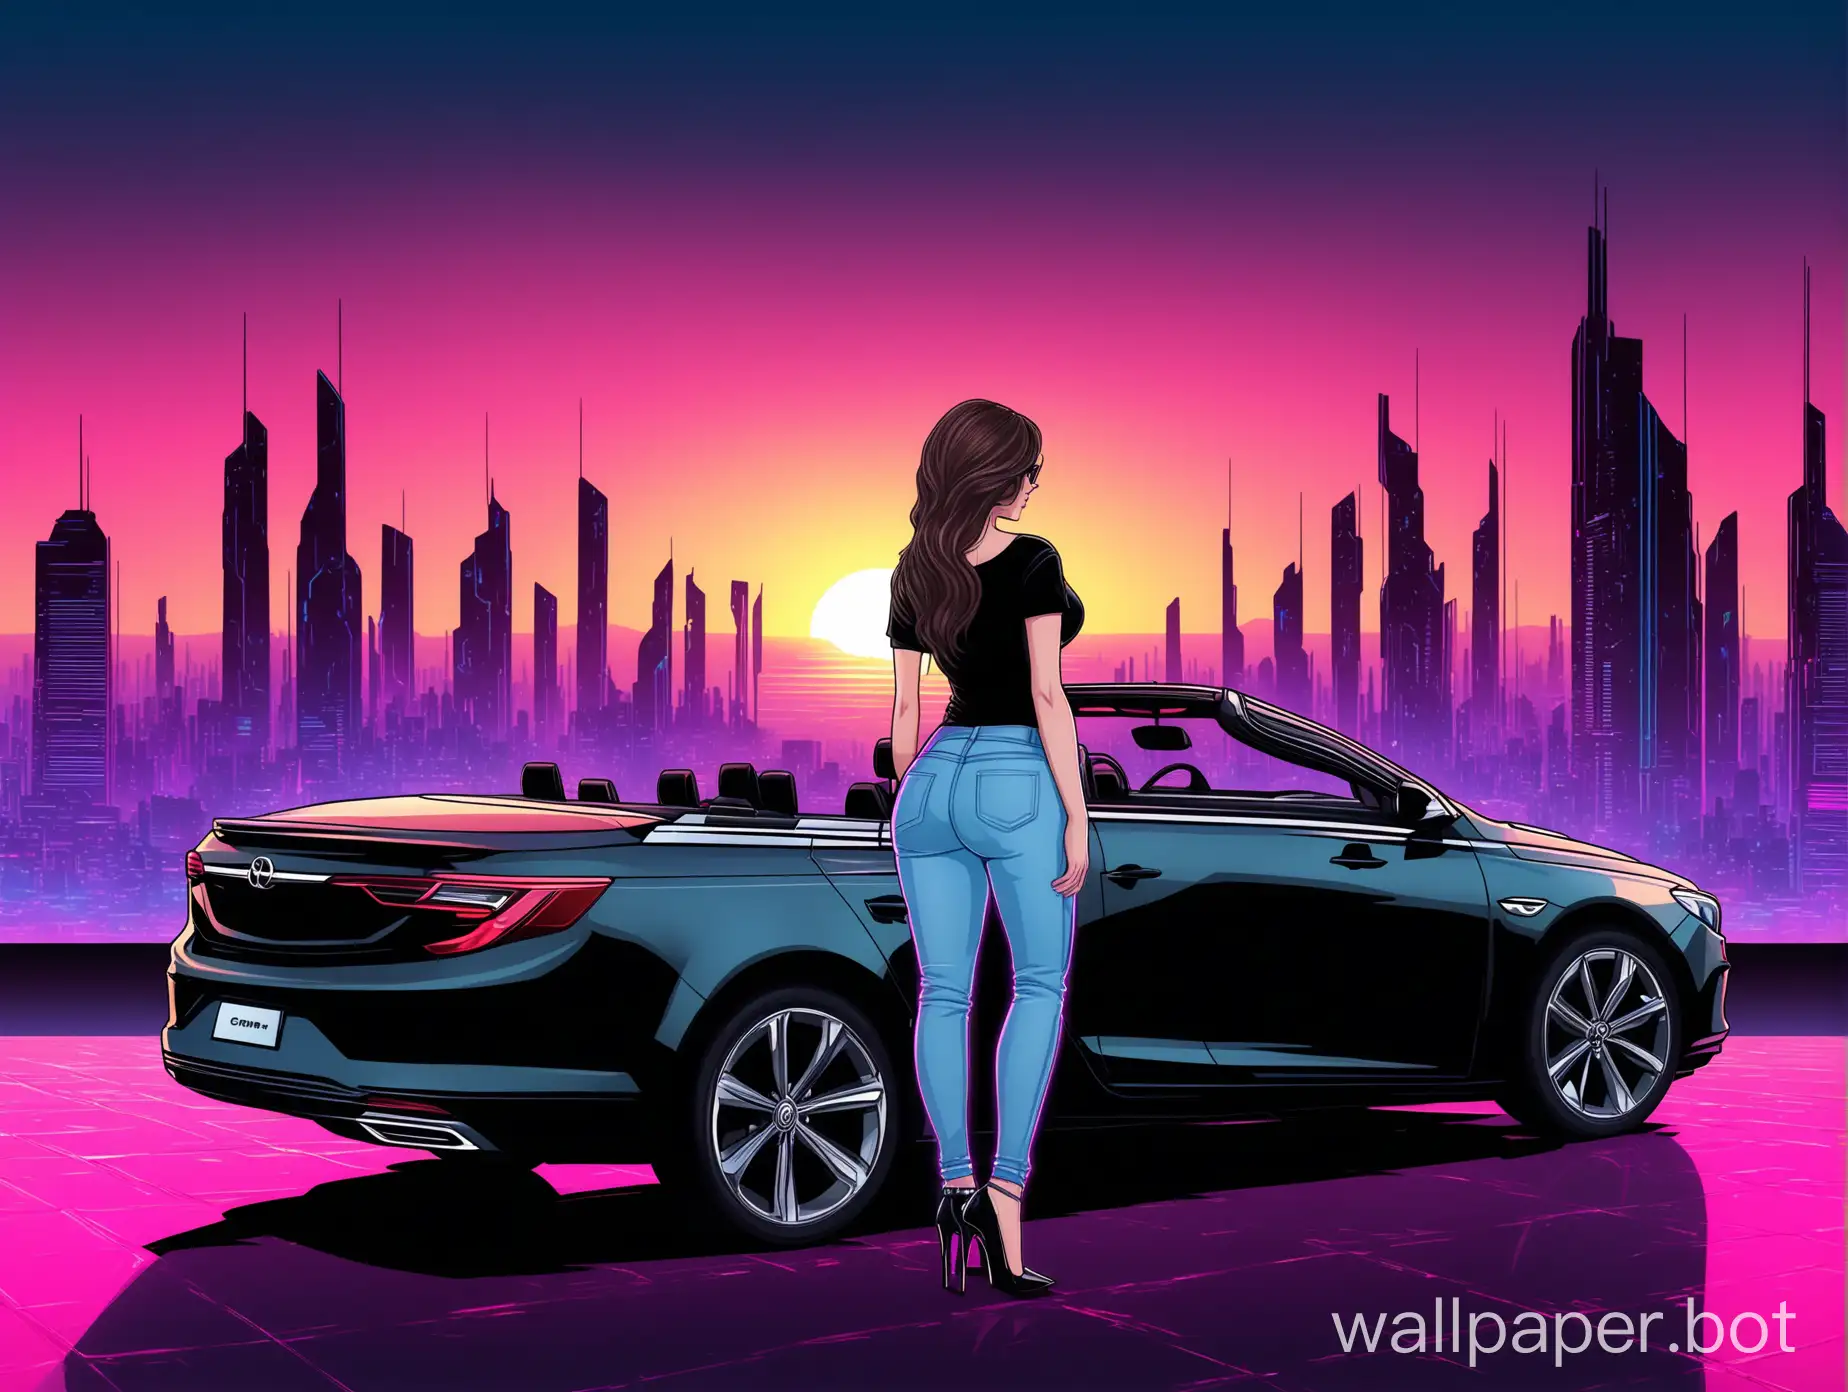 fuller shape woman with long darkbrown hair visible from the back (her face isn't visible), wearing black t-shirt with cleavage, jeans and high heels standing near the right side of a grey opel insignia grandsport convertible car visible from the side. background is a futuristic city at sunset, synthwave style